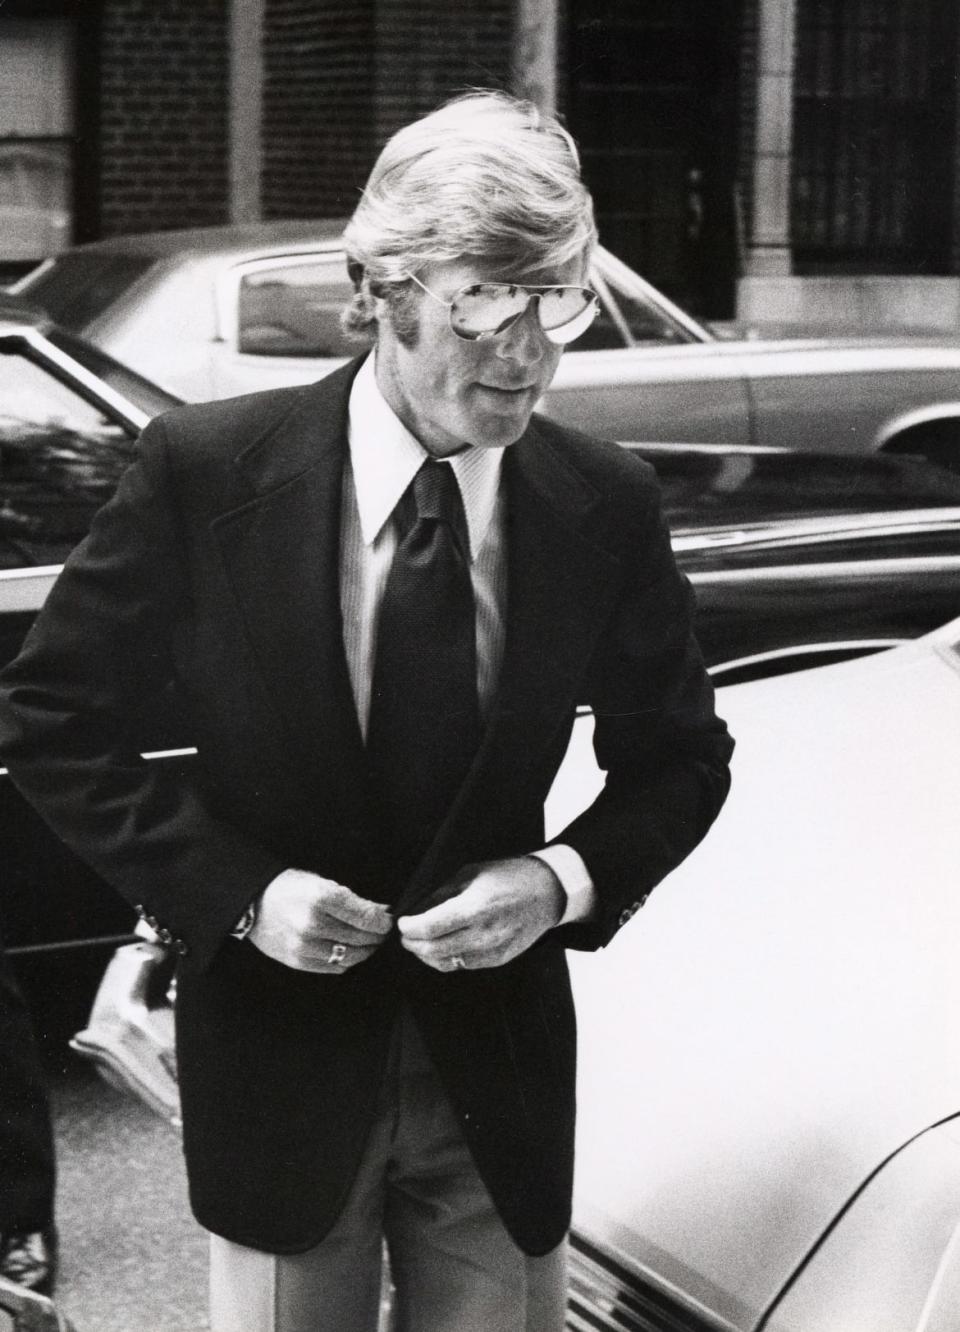 <div class="inline-image__caption"><p>Robert Redford </p></div> <div class="inline-image__credit">Ron Galella / Ron Galella Collection / Getty </div>